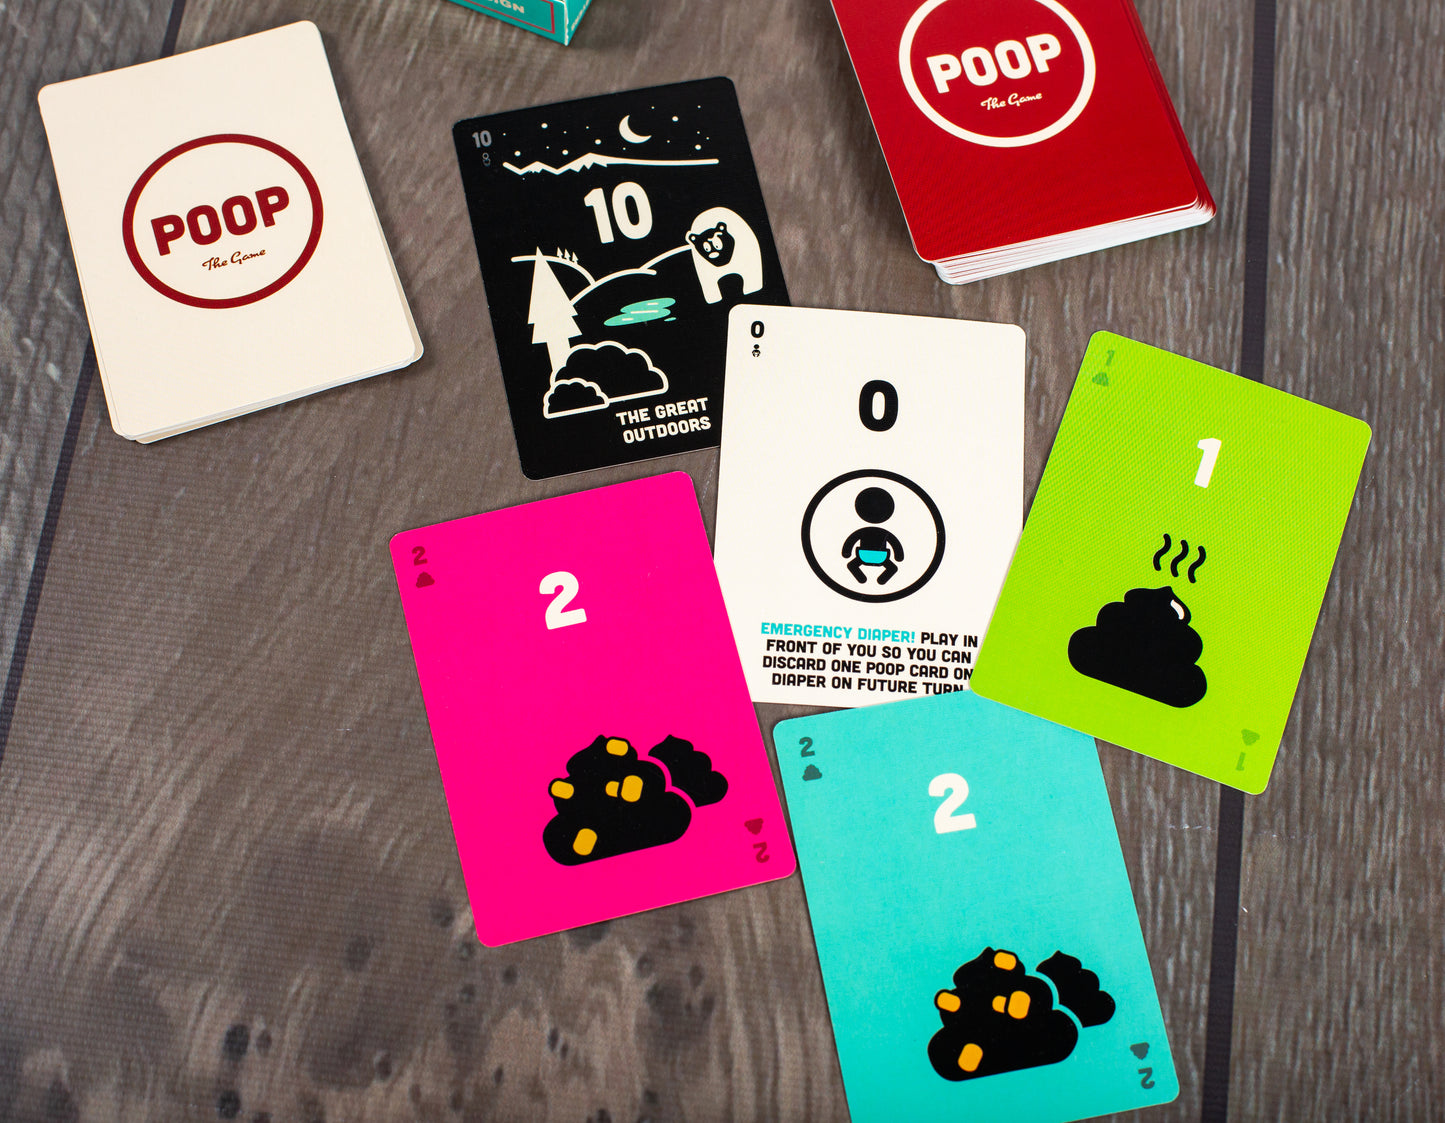 POOP: Public Restroom Edition | Family Friendly Card Game | 2-5 Players Game Breaking Games